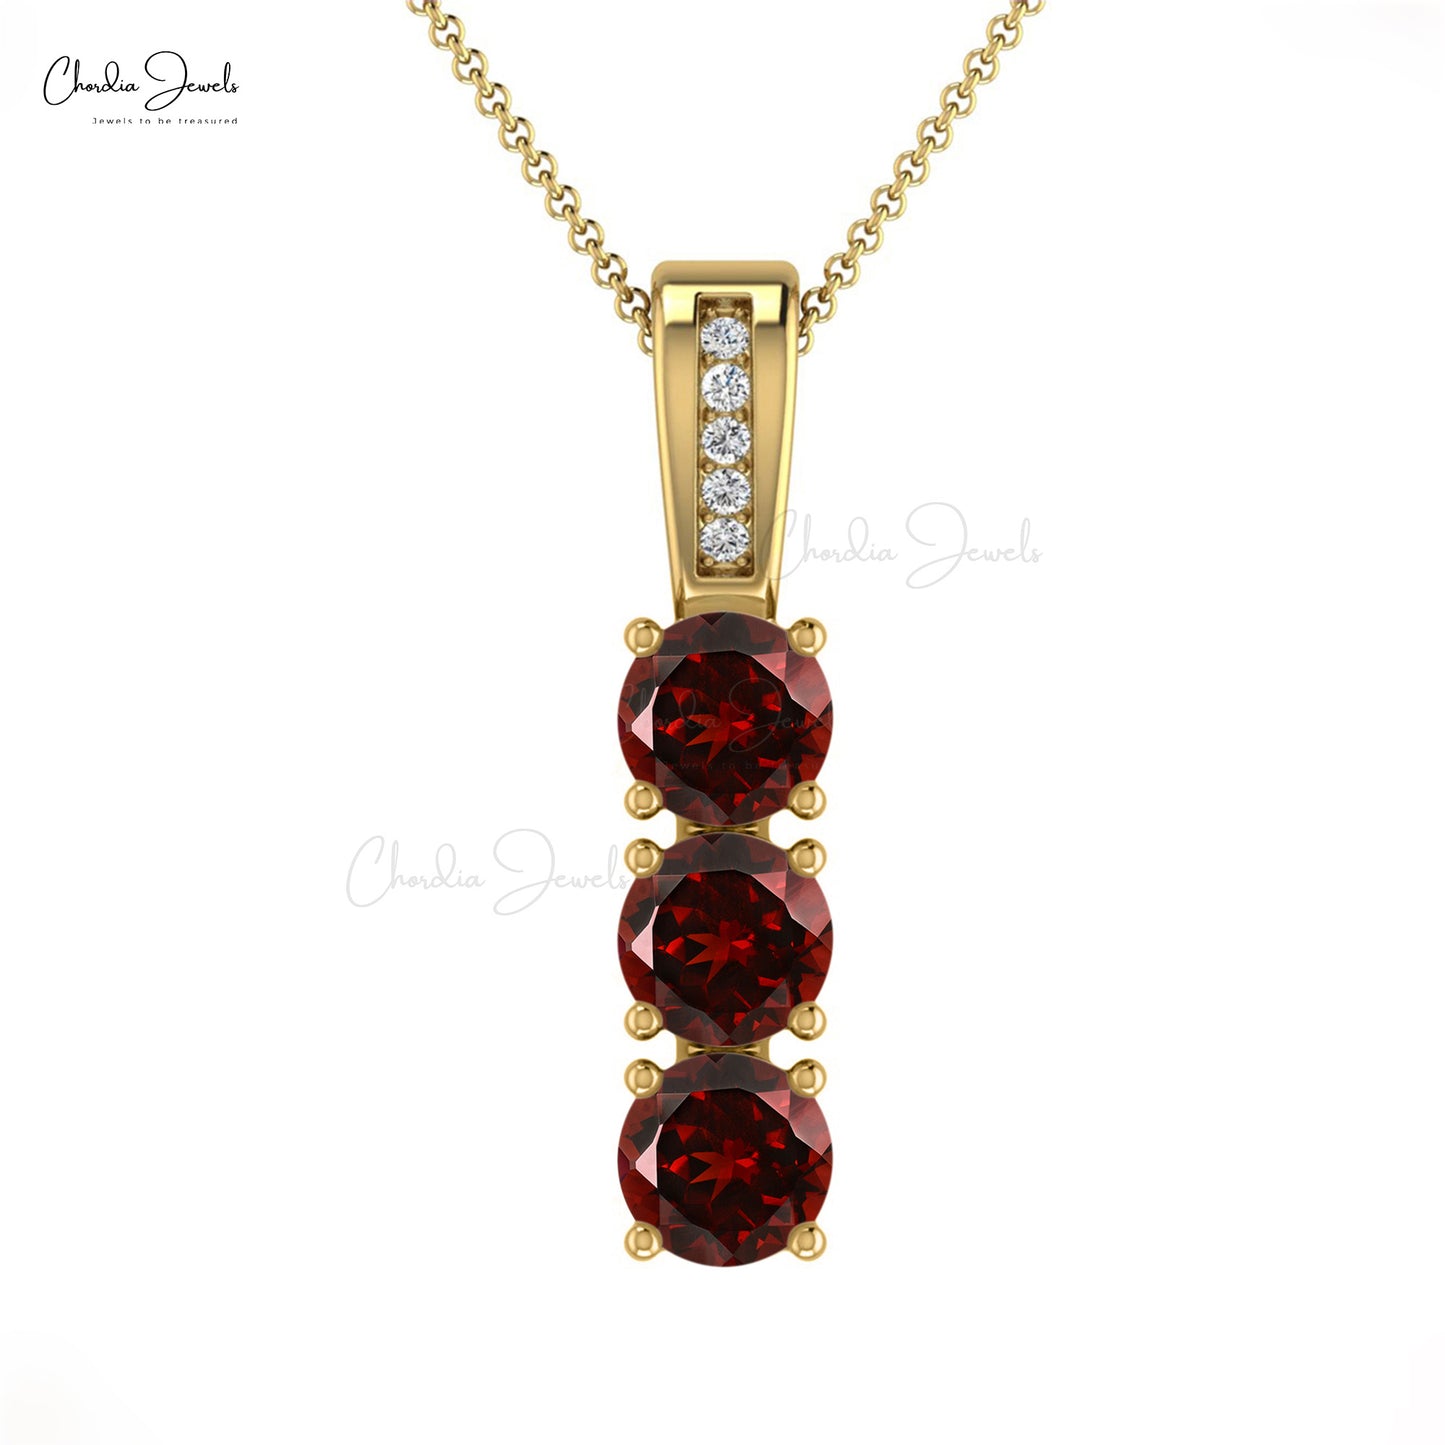 Load image into Gallery viewer, New Design Natural White Diamond Dangle Pendant Necklace 4mm Round Cut Red Garnet 3-Stone Pendant in 14k Solid Gold Jewelry For Women
